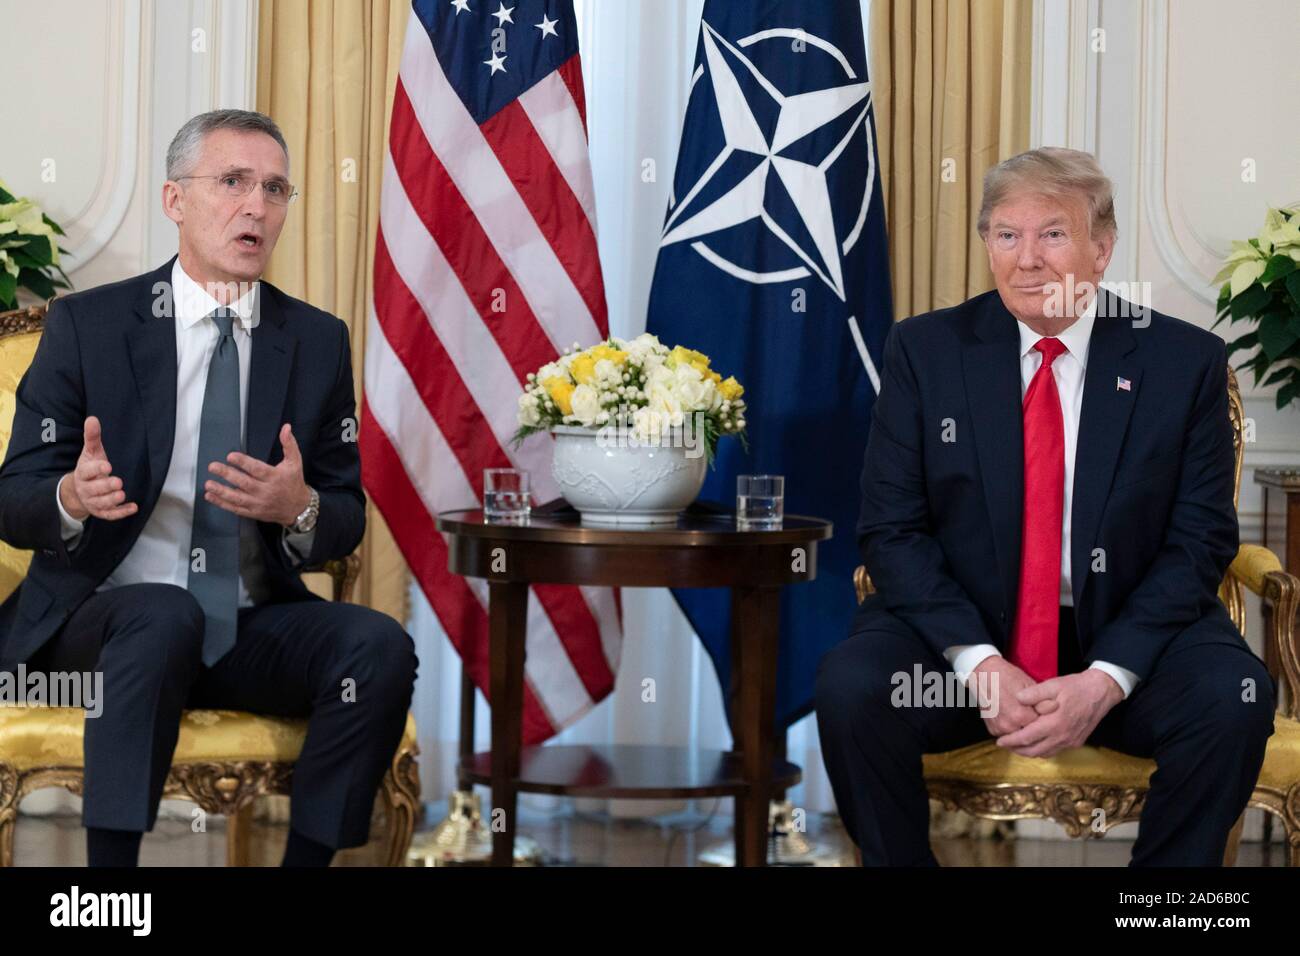 London, UK. 03 December, 2019. U.S. President Donald Trump holds a bilateral meeting with NATO Secretary General Jens Stoltenberg before the start of the NATO Summit at Winfield House December 3, 2019 in London, UK.   Credit: Shealah Craighead/Planetpix/Alamy Live News Stock Photo